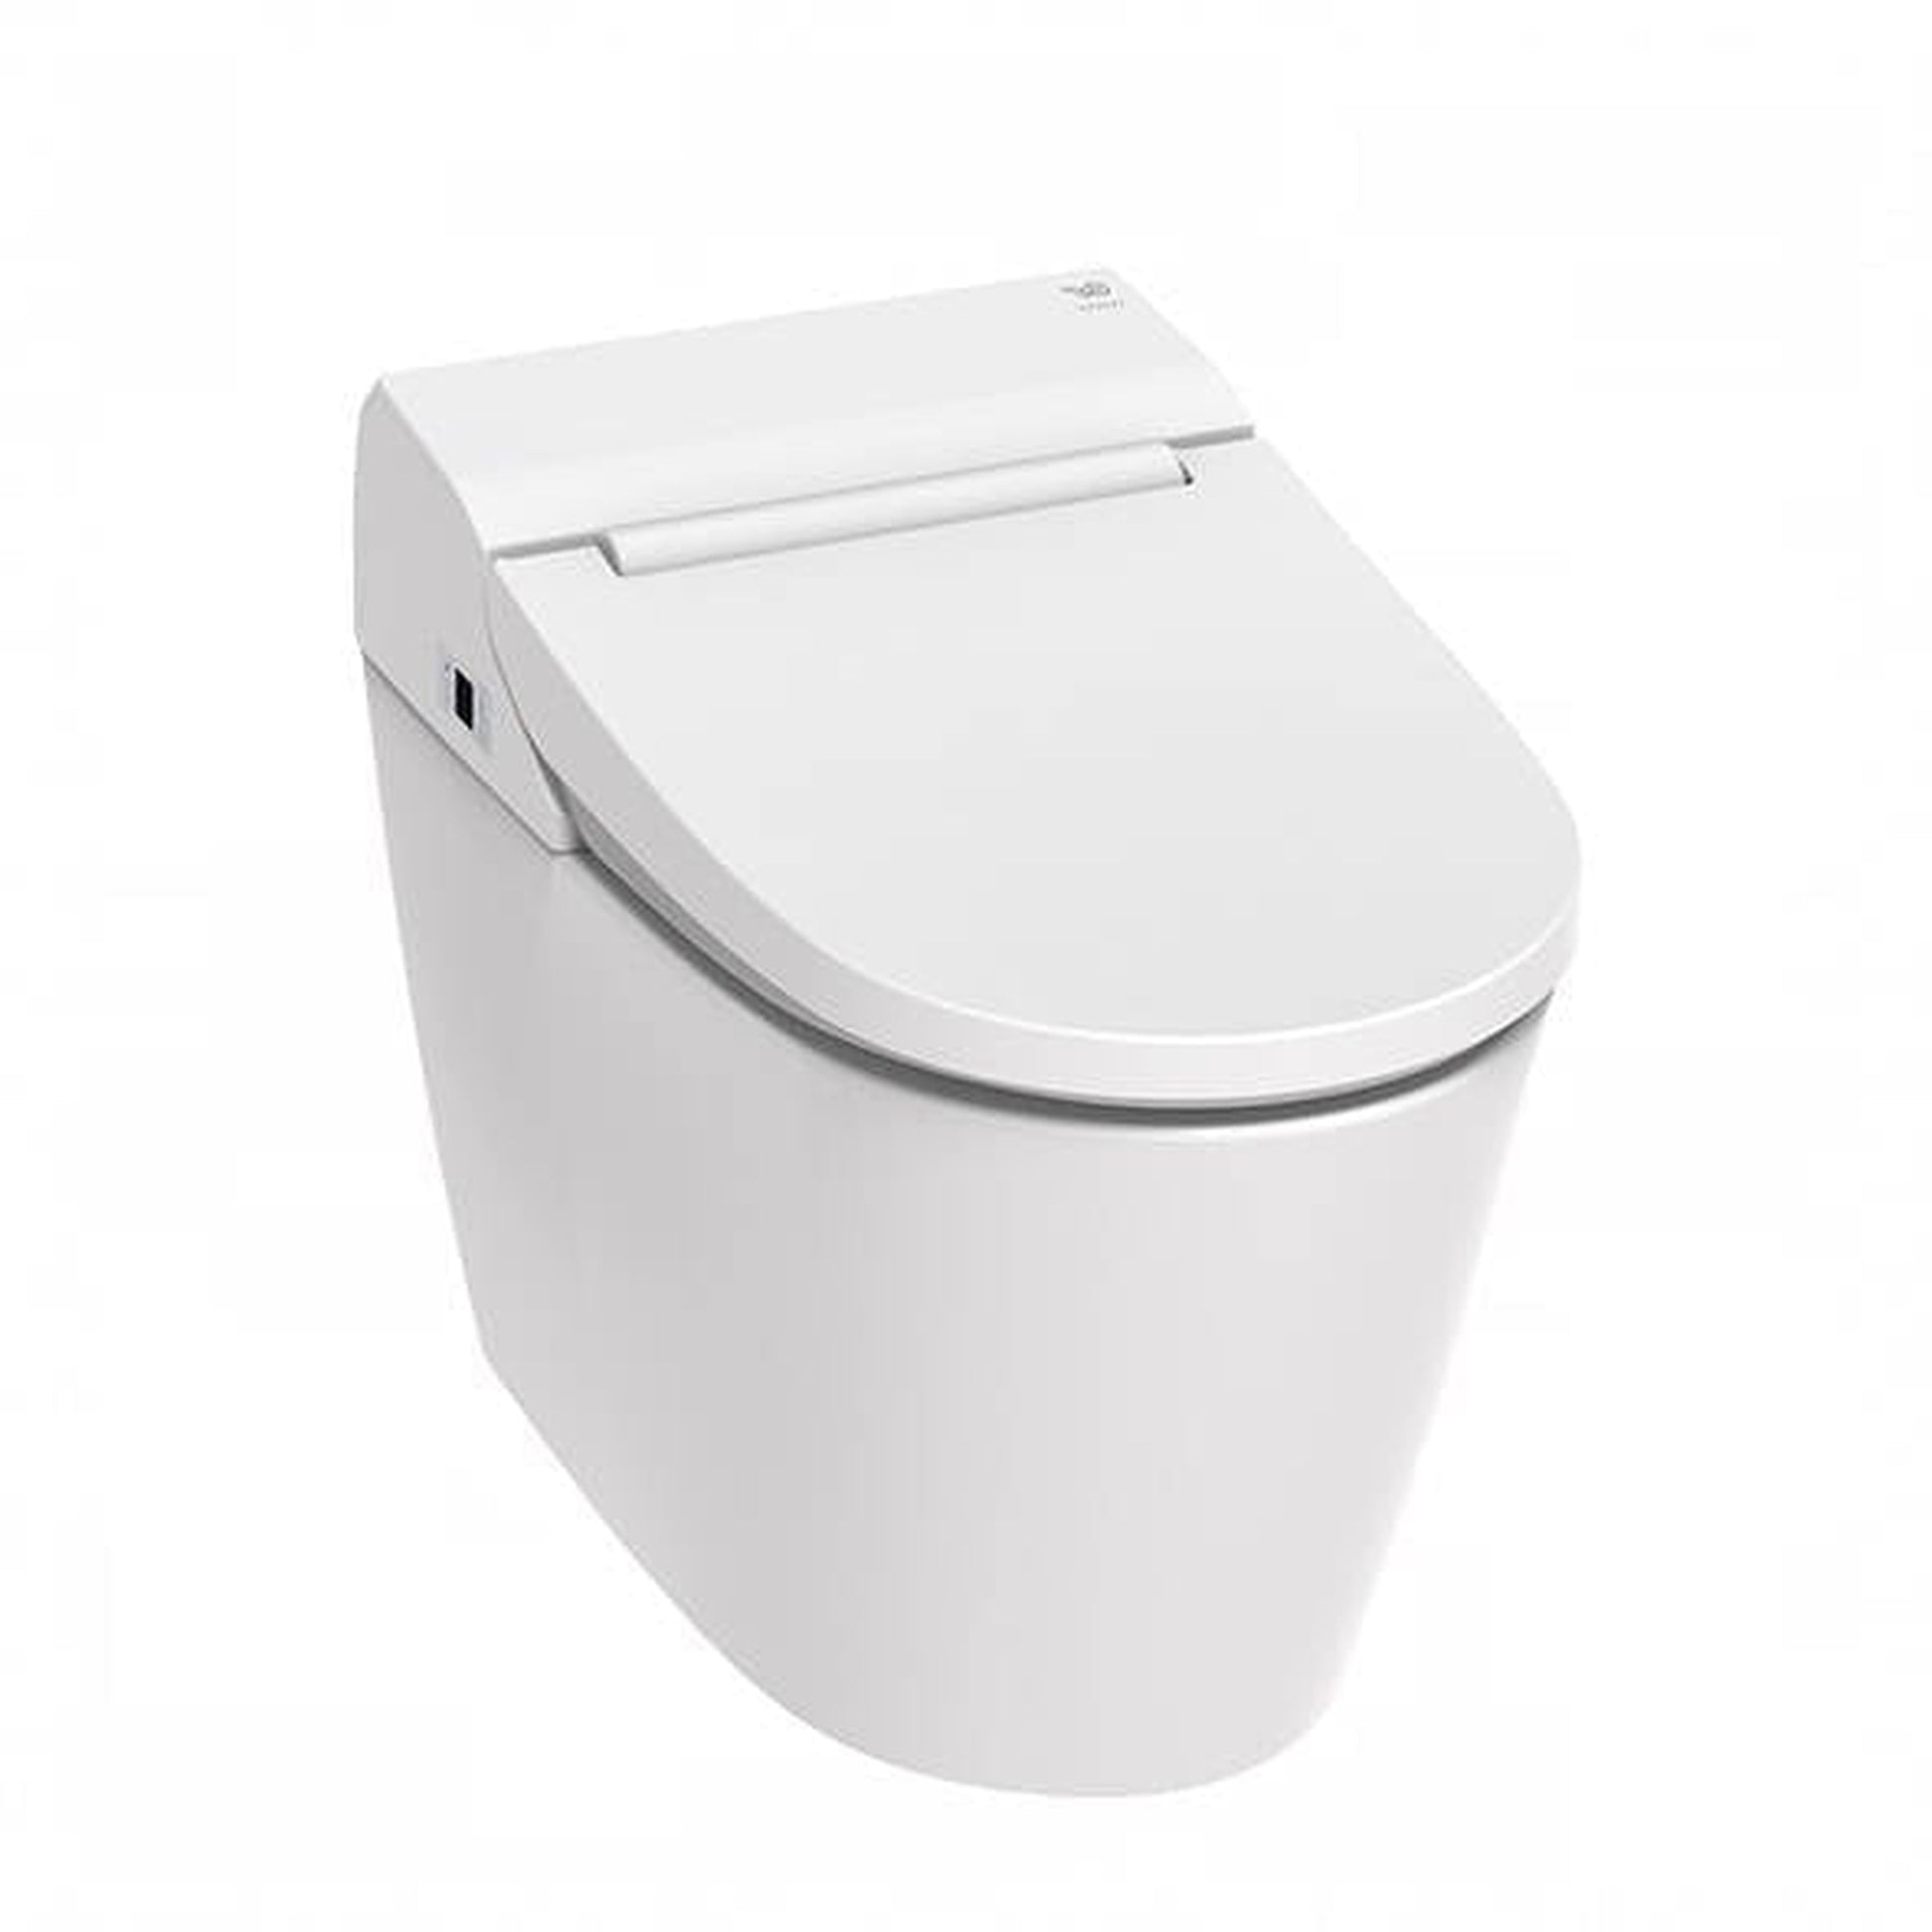 VOVO Stylement TCB 8100W Electric Integrated Smart Bidet Toilet With Remote Control